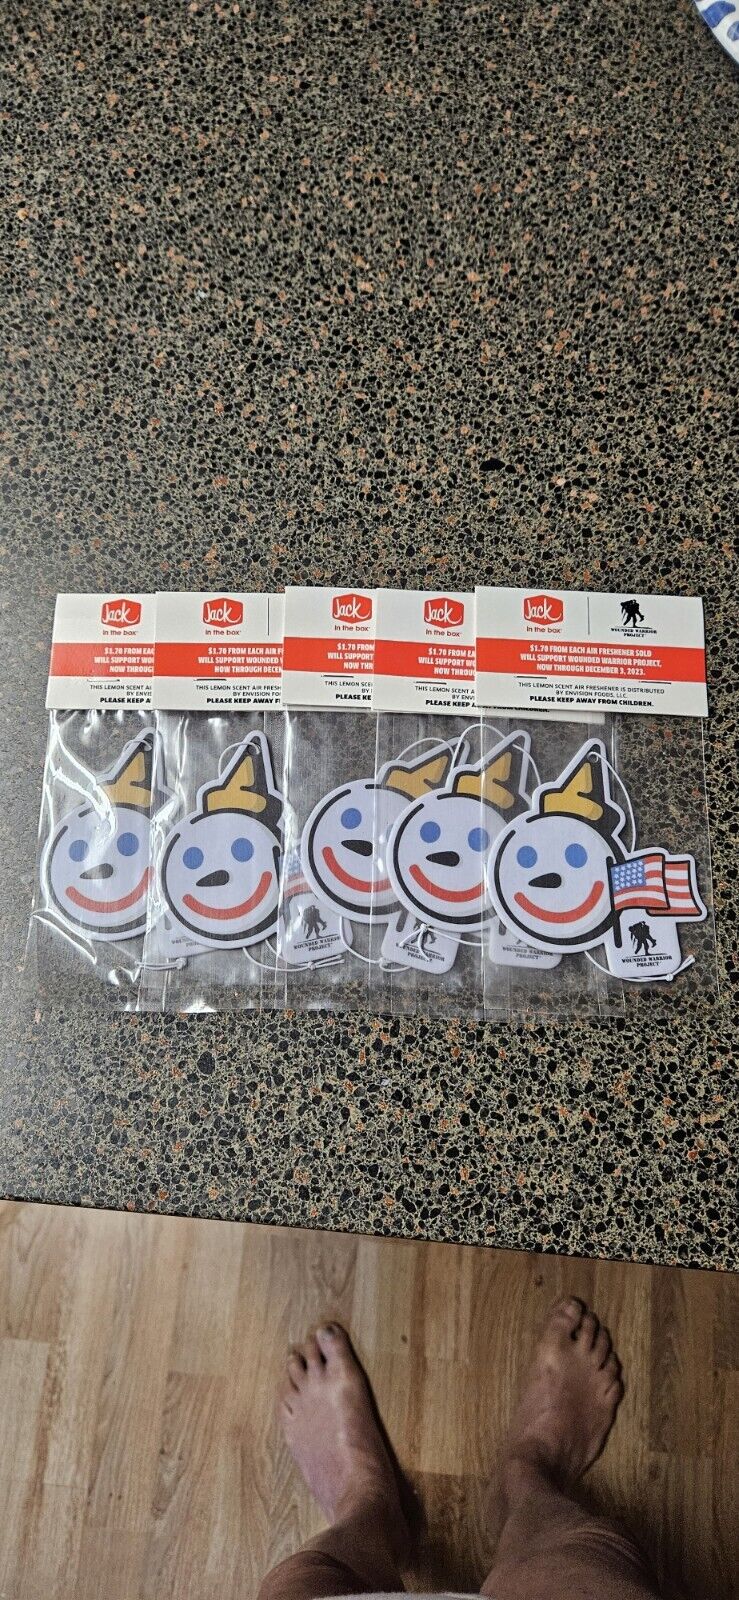 5 Jack in the Box Air Freshener - WOUNDED WARRIOR -Lemon Scent